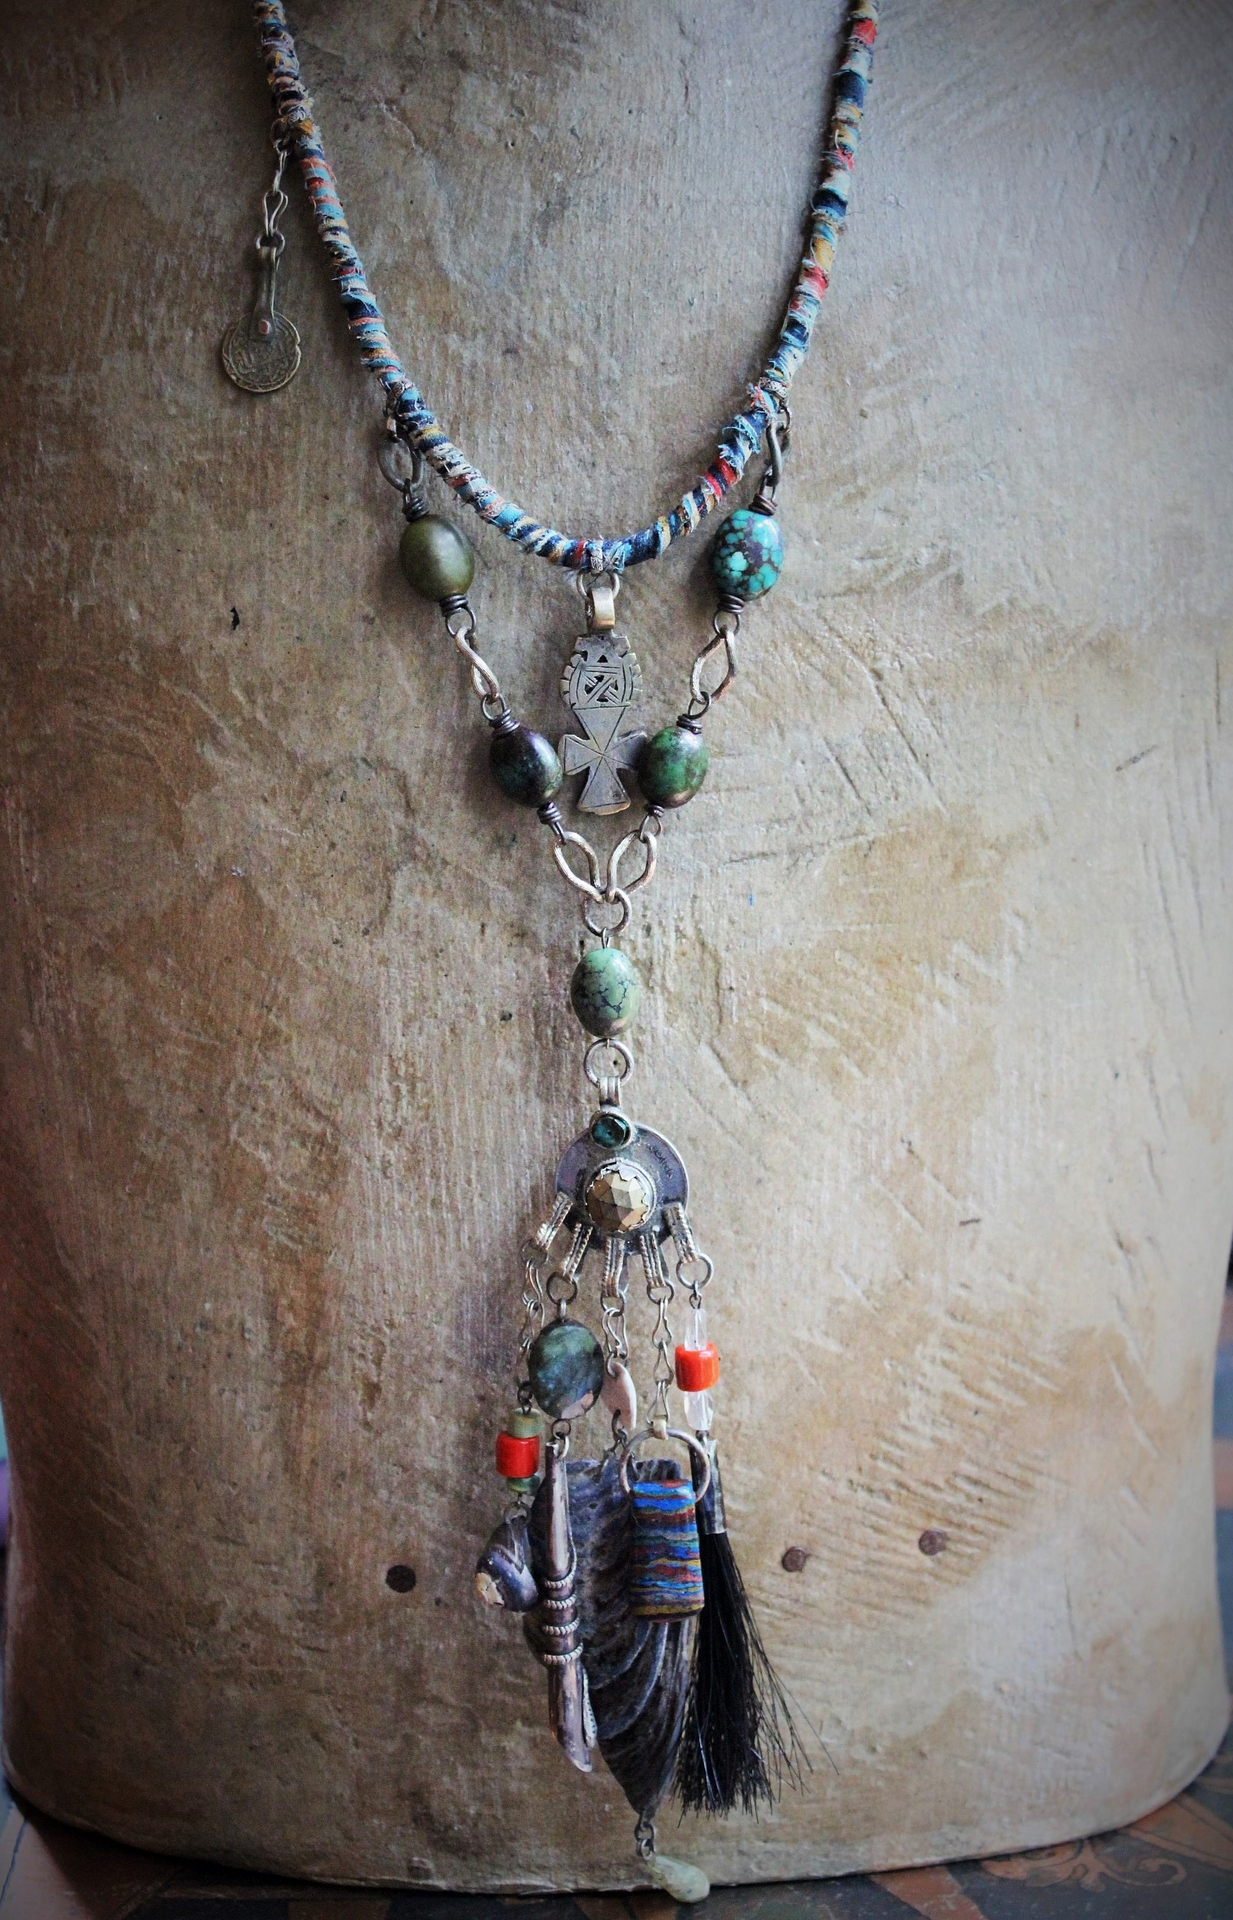 I Speak to You Amulet Necklace w/Antique Kantha,Hand Painted Mussel Shell,Antique Coptic Cross,Antique Sterling Snake Drop,Rainbow Jasper Drop,Antique Gypsy Coin + Much More!